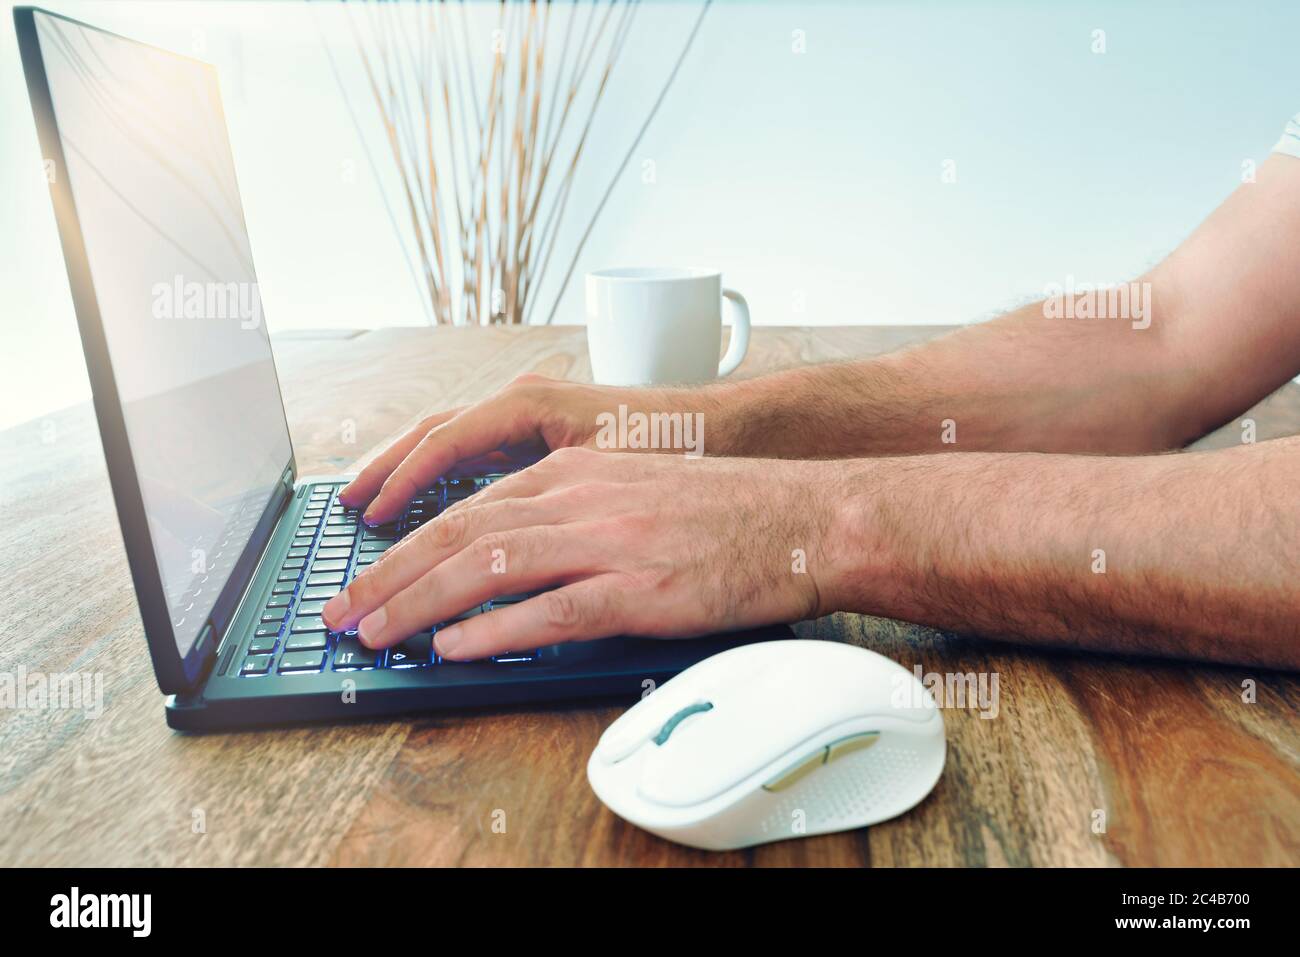 low angle view of man using laptop computer on wooden table with bright sunlight coming through window Stock Photo